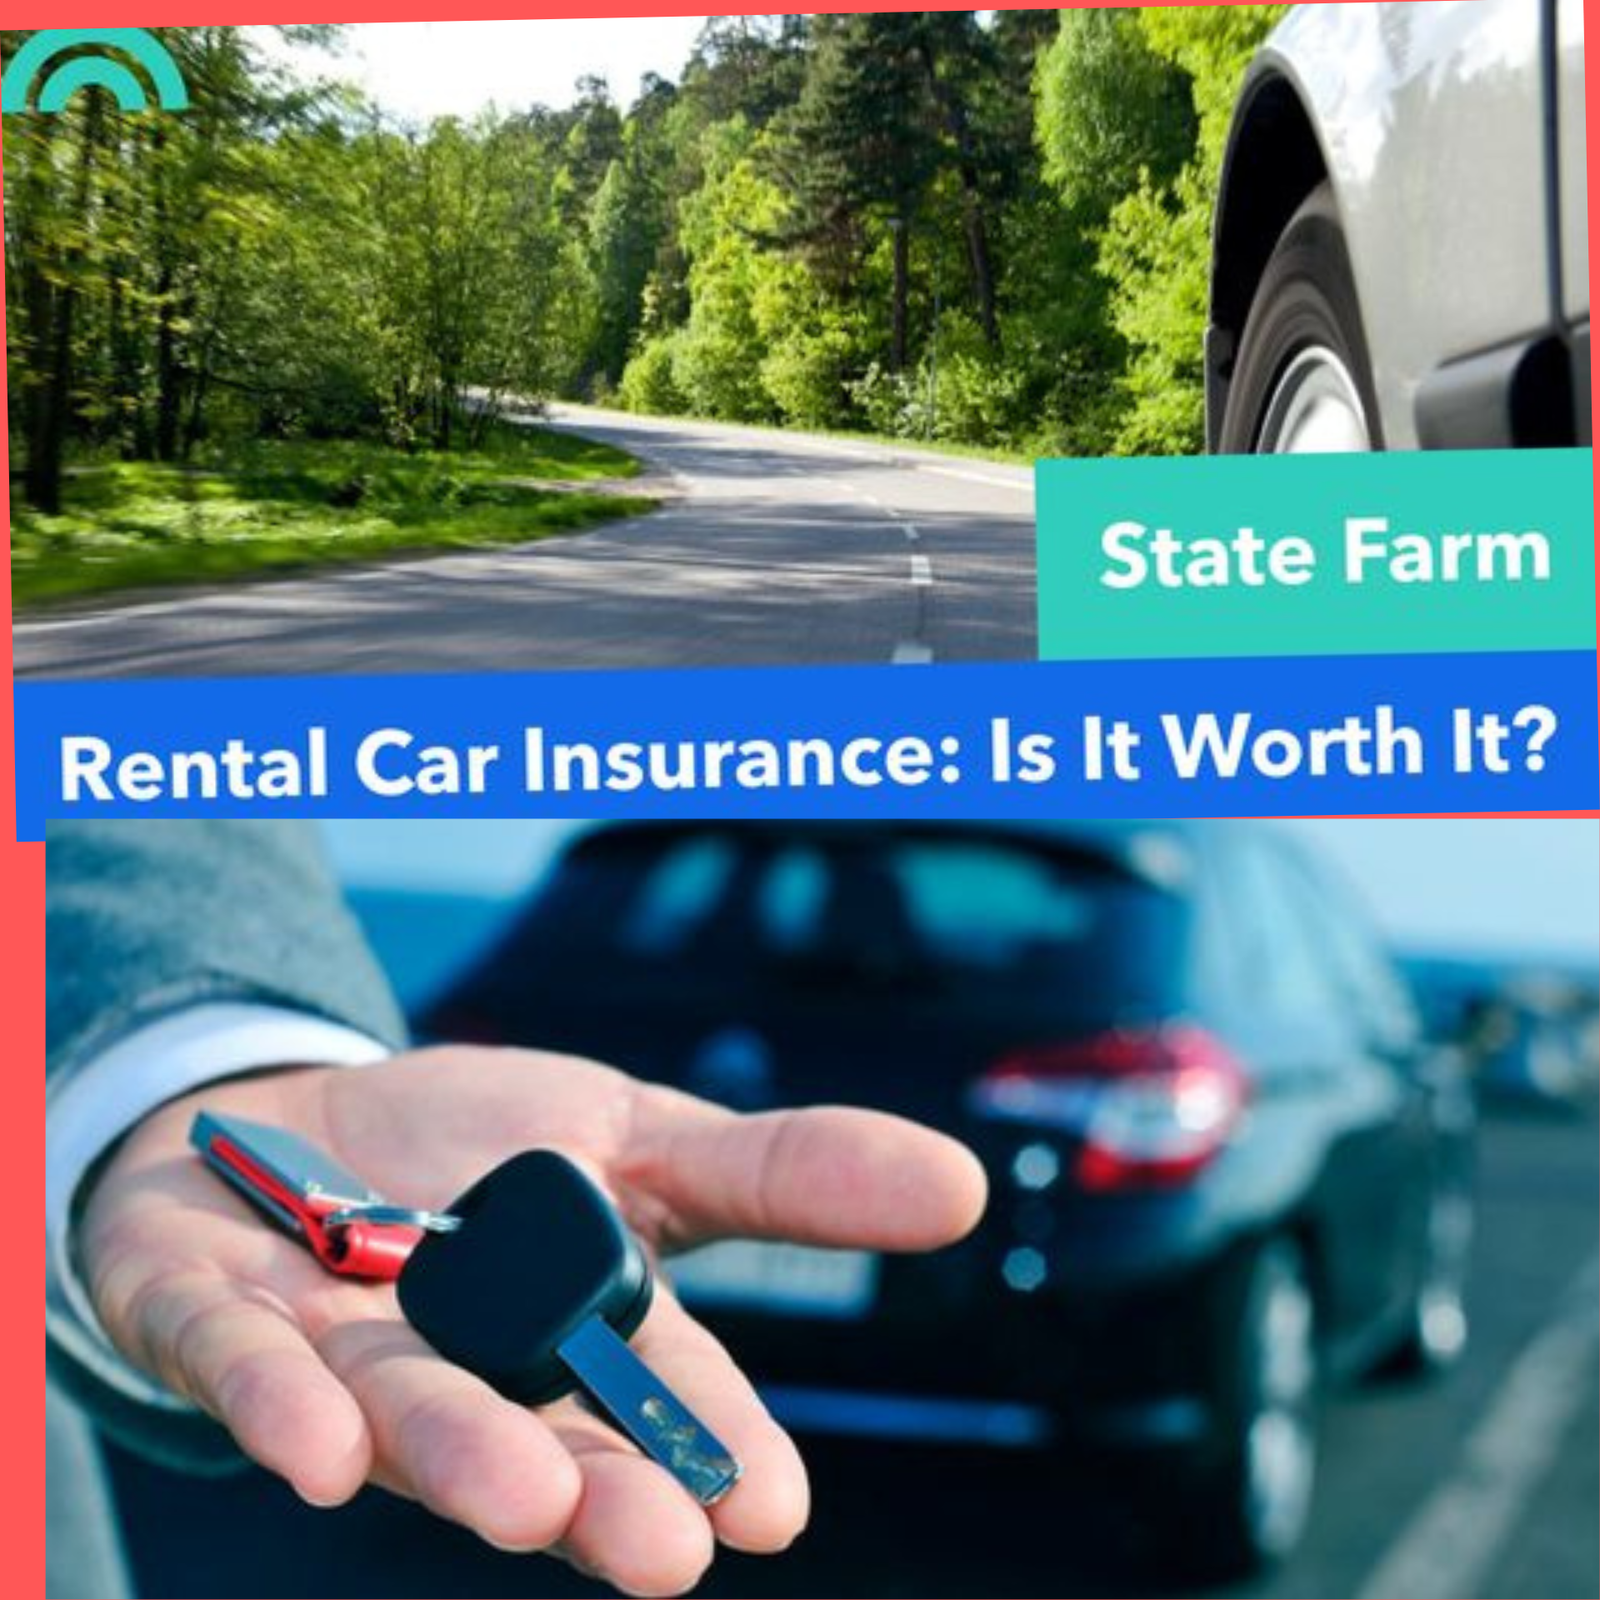 Does State Farm offer travel insurance?